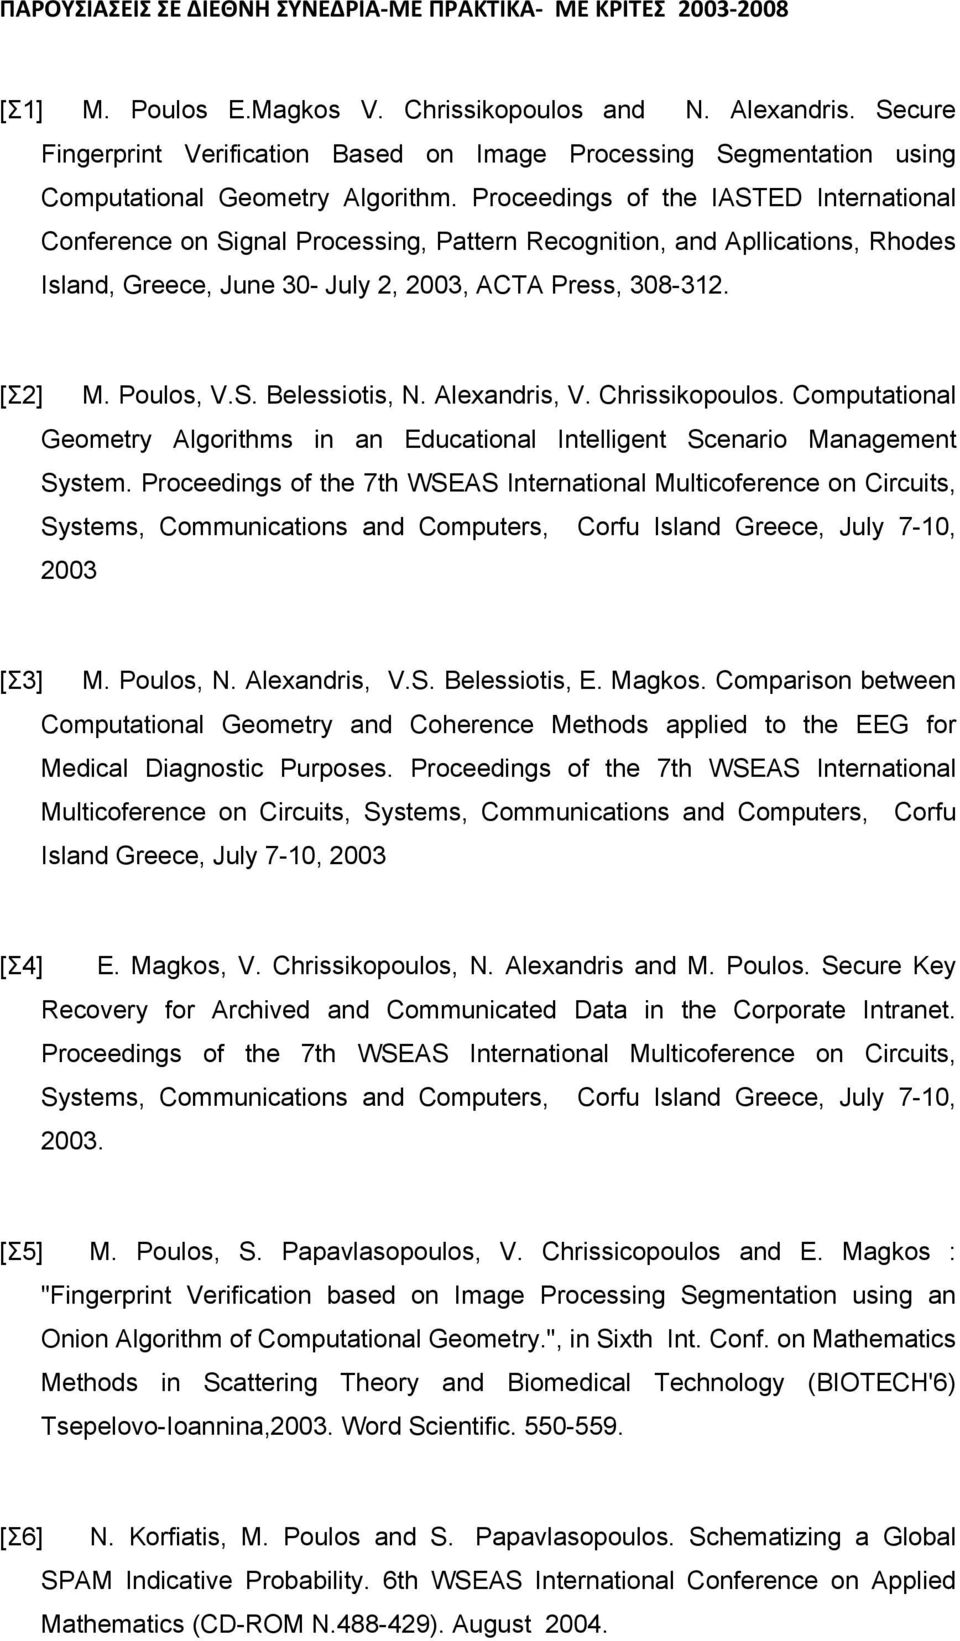 Proceedings of the IASTED International Conference on Signal Processing, Pattern Recognition, and Apllications, Rhodes Island, Greece, June 30- July 2, 2003, ACTA Press, 308-312. [Σ2] M. Poulos, V.S. Belessiotis, N.